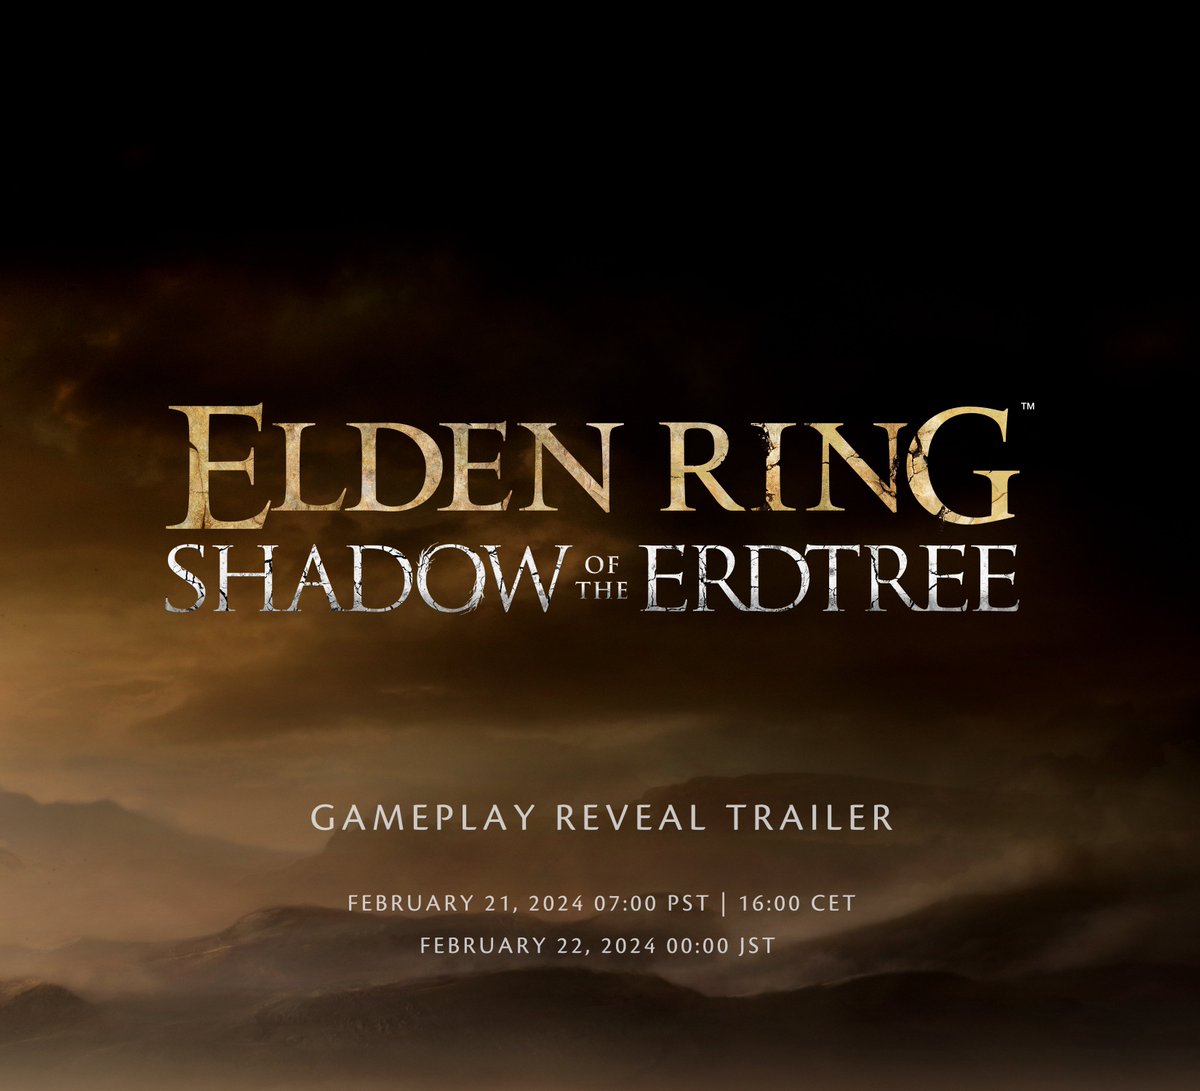 The first trailer for #ELDENRING Shadow of the Erdtree will be revealed in 16 hours. Join us at 15:00 UTC. youtu.be/qLZenOn7WUo